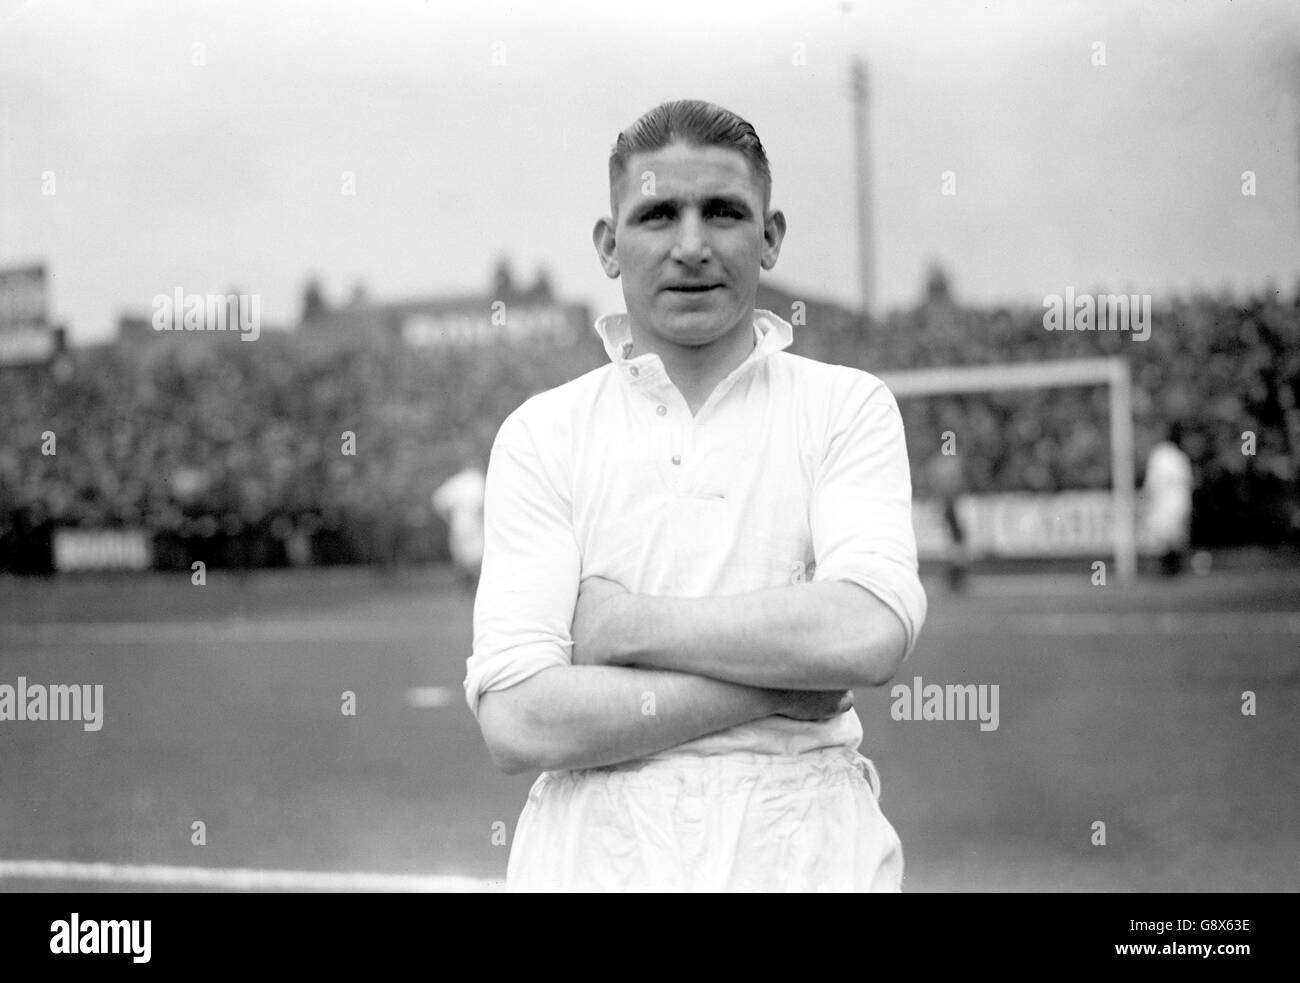 Swansea FC Photocall. Swansea Town FC player Miller. Stock Photo